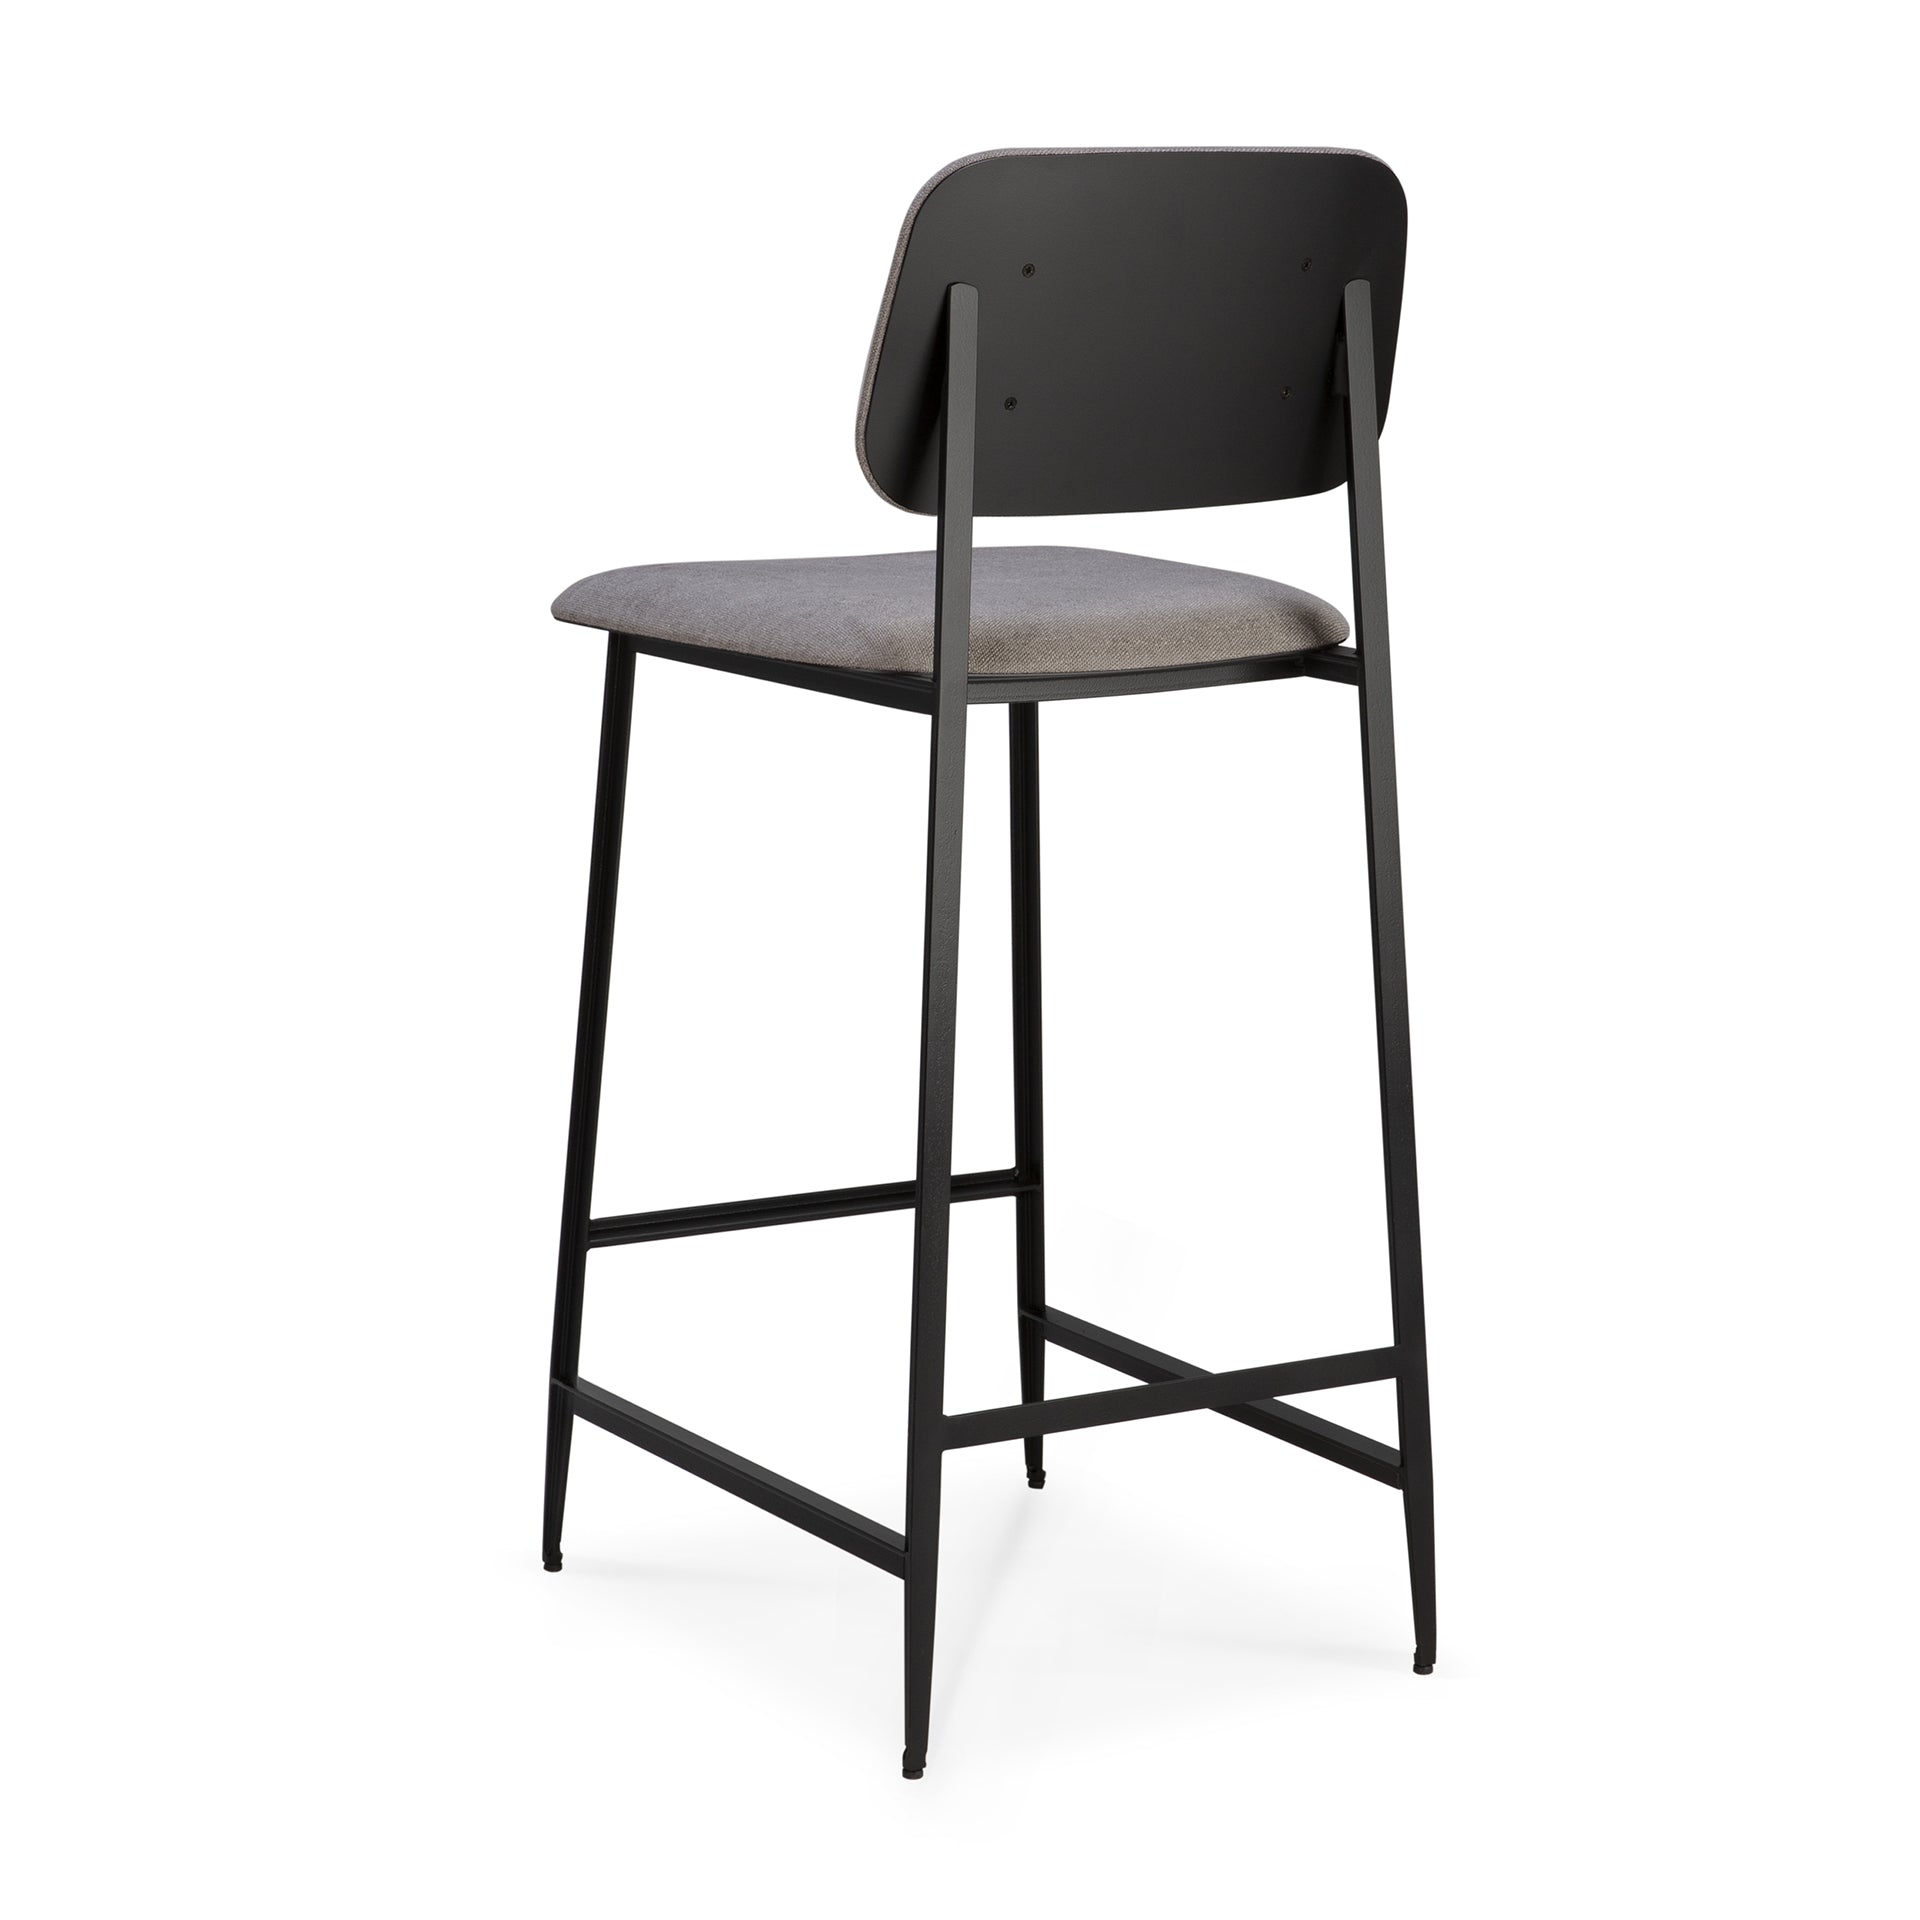 Home › DC Counter Stool